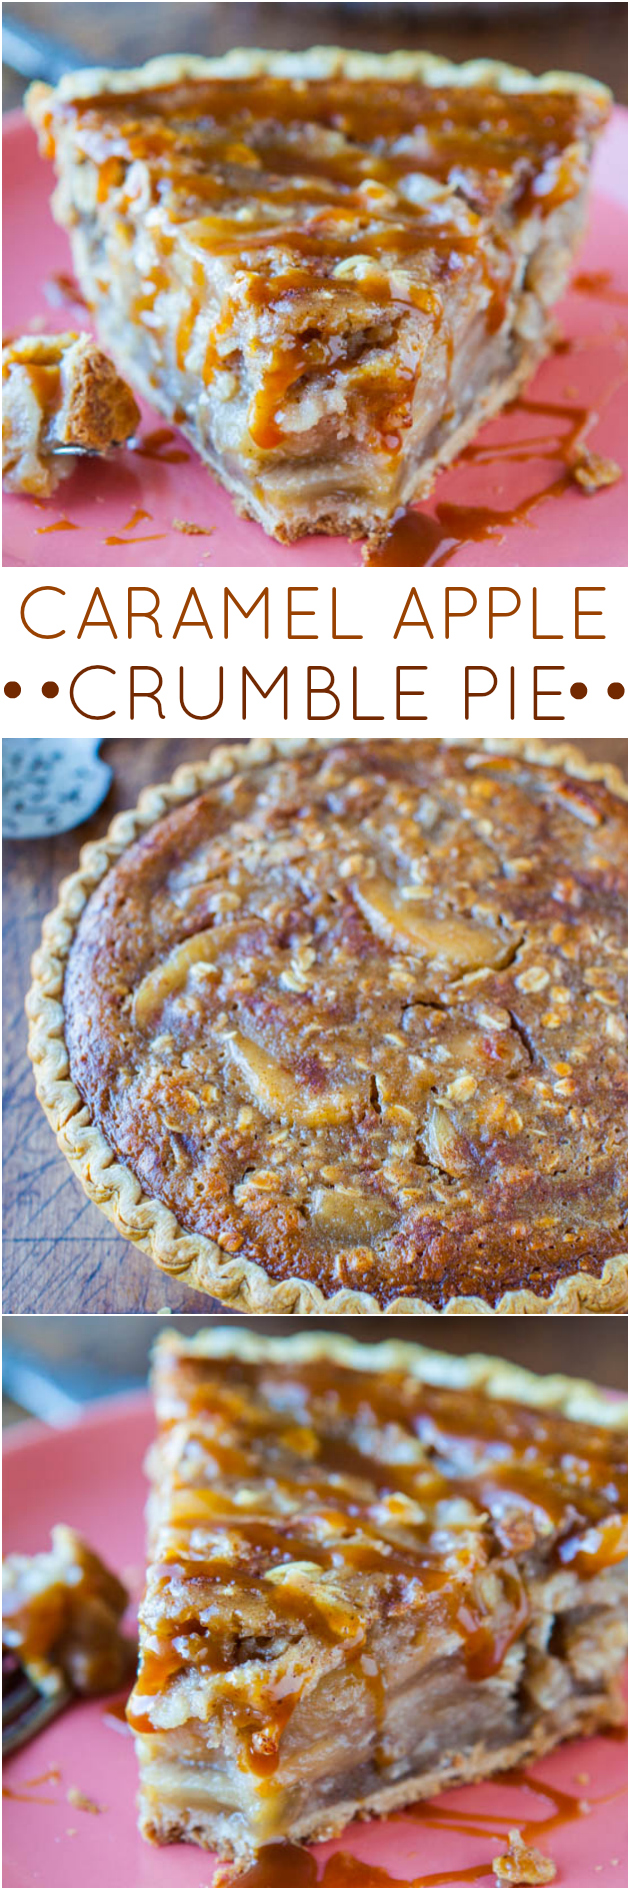 Caramel Apple Crumble Pie - Apple pie meets apple crumble with loads of caramel! The easiest apple pie you'll ever make. Goofproof 5-minute recipe for those of us who aren't pie makers!